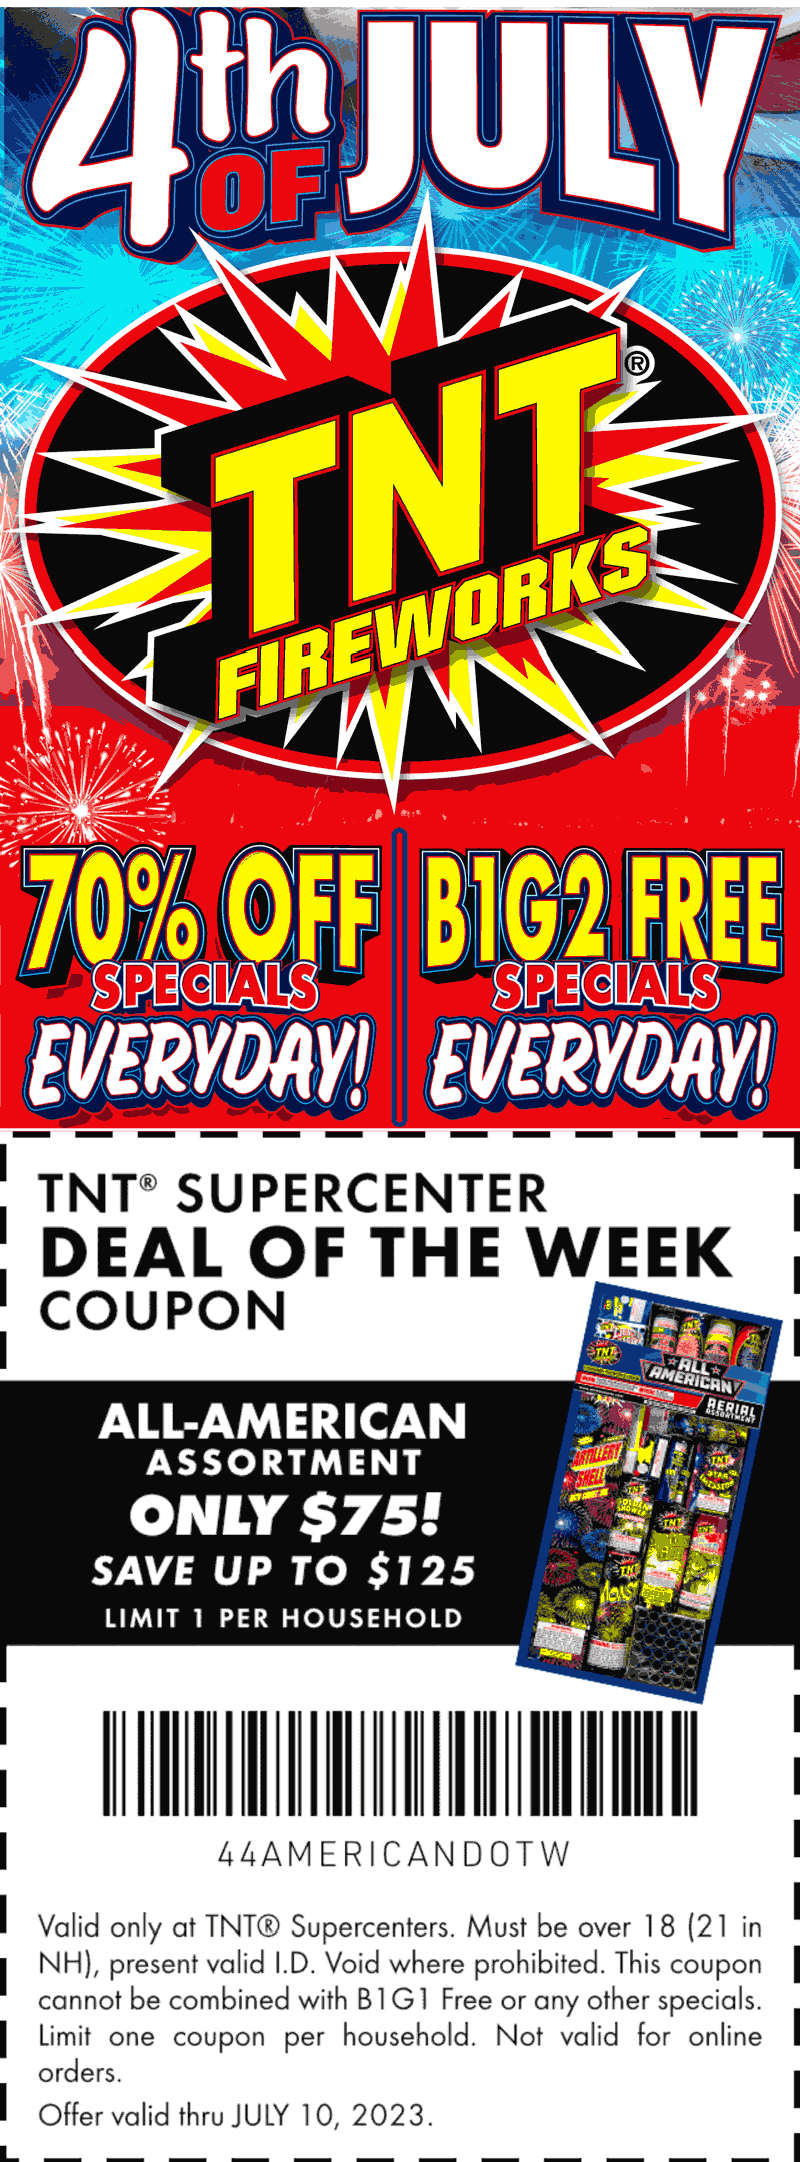 TNT Fireworks stores Coupon  $125 off an all-american assortment at TNT Fireworks #tntfireworks 